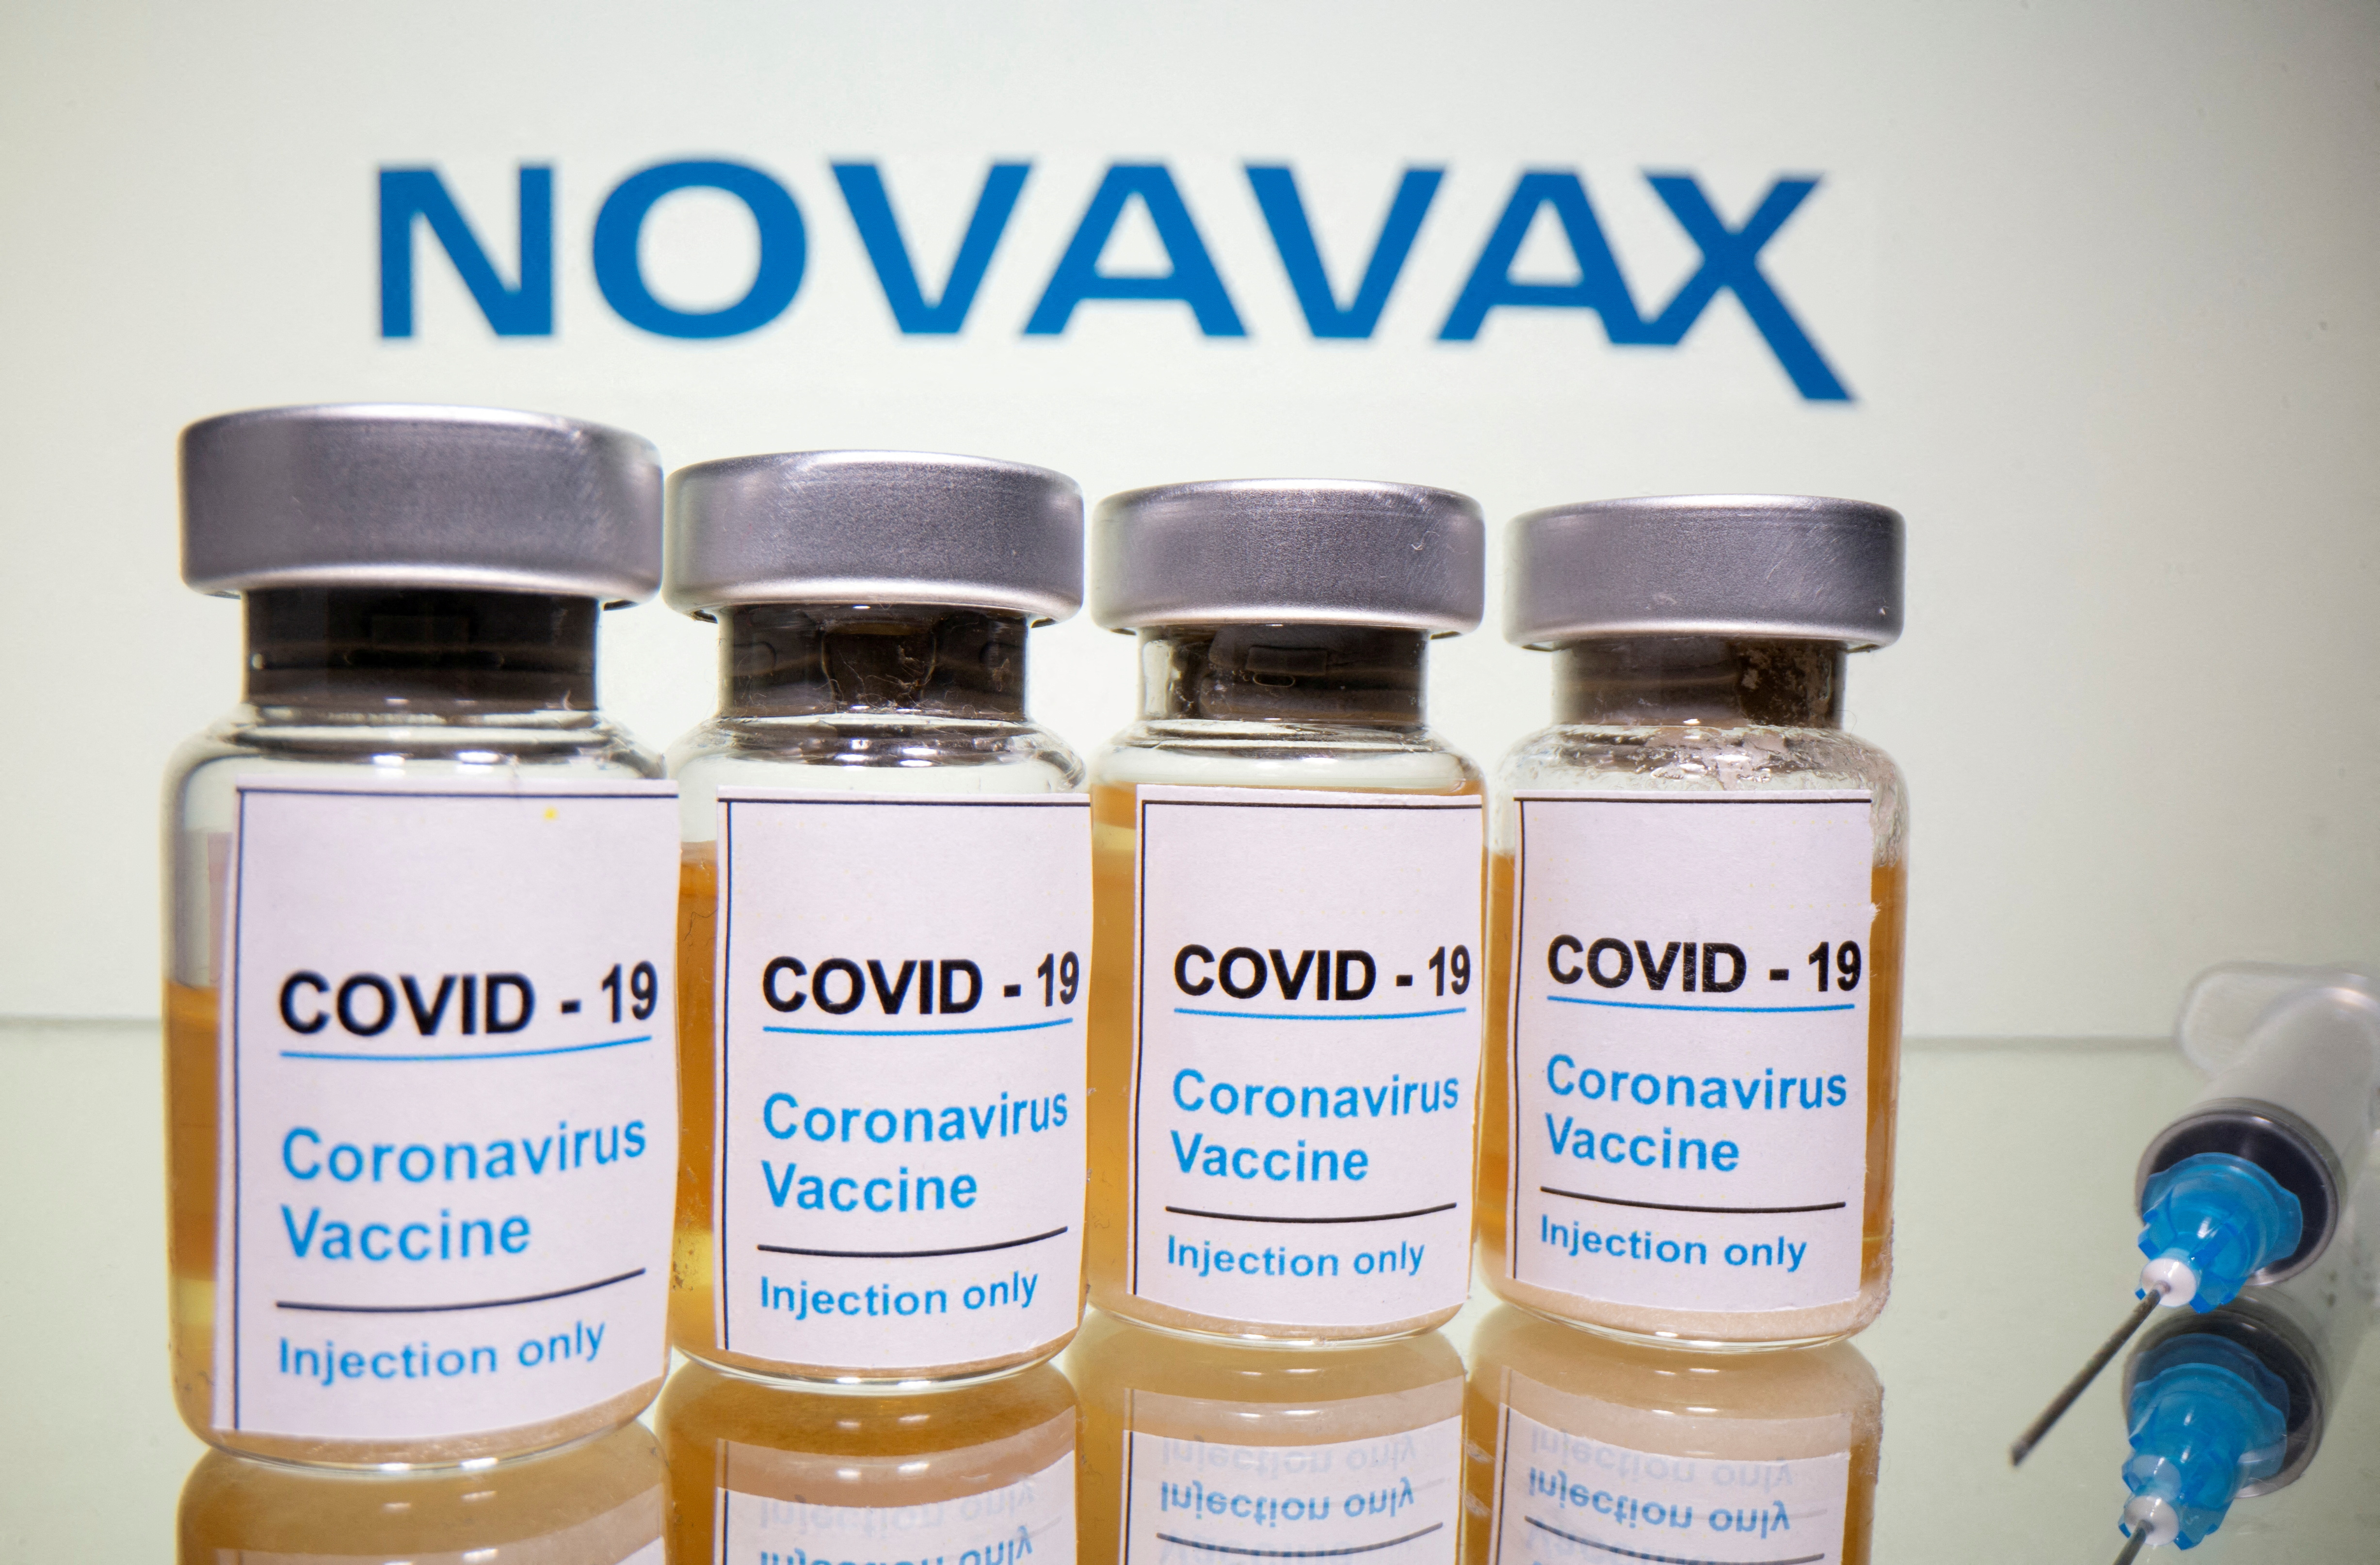 Vials and medical syringe are seen in front of Novavax's logo in this illustration